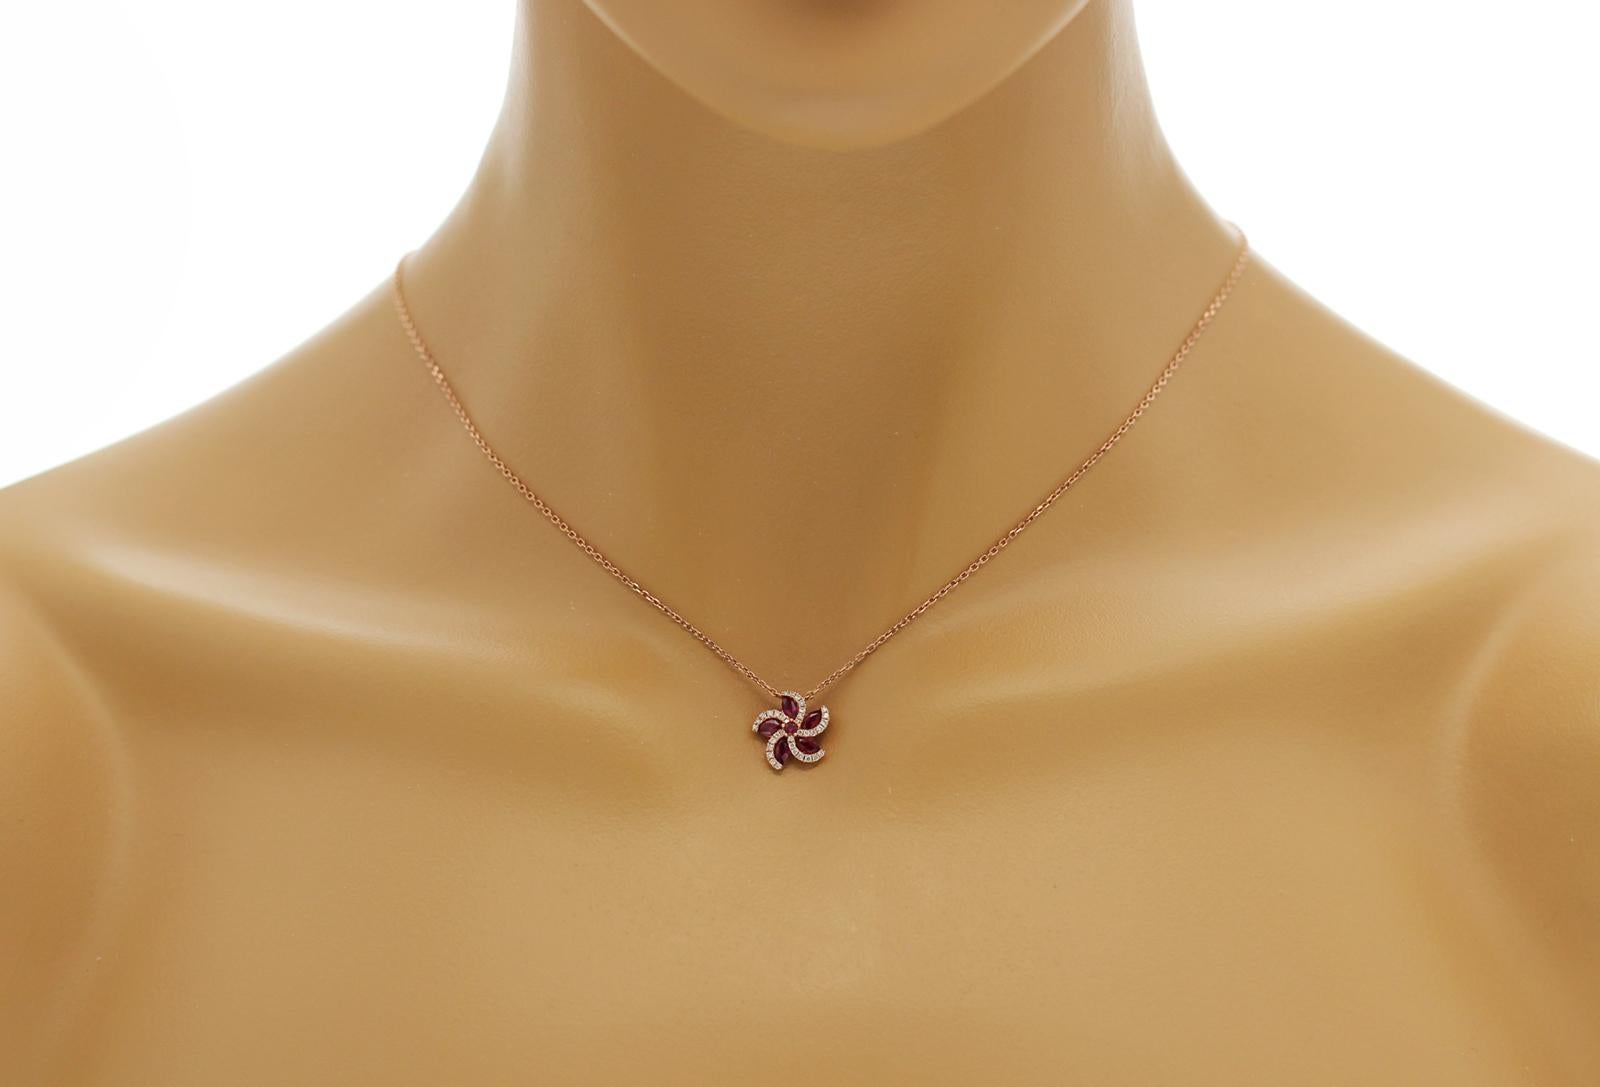 100% Authentic, 100% Customer Satisfaction

Pendant: 12 mm

Chain: 0.5 mm

Size: 16-18 Inches

Metal: 18K Rose Gold

Hallmarks: 18K

Total Weight: 2.2 Grams

Stone Type: 0.72 CT Natural HIgh-Quality Ruby &  Diamond 0.15 CT  G   SI1

Condition: New